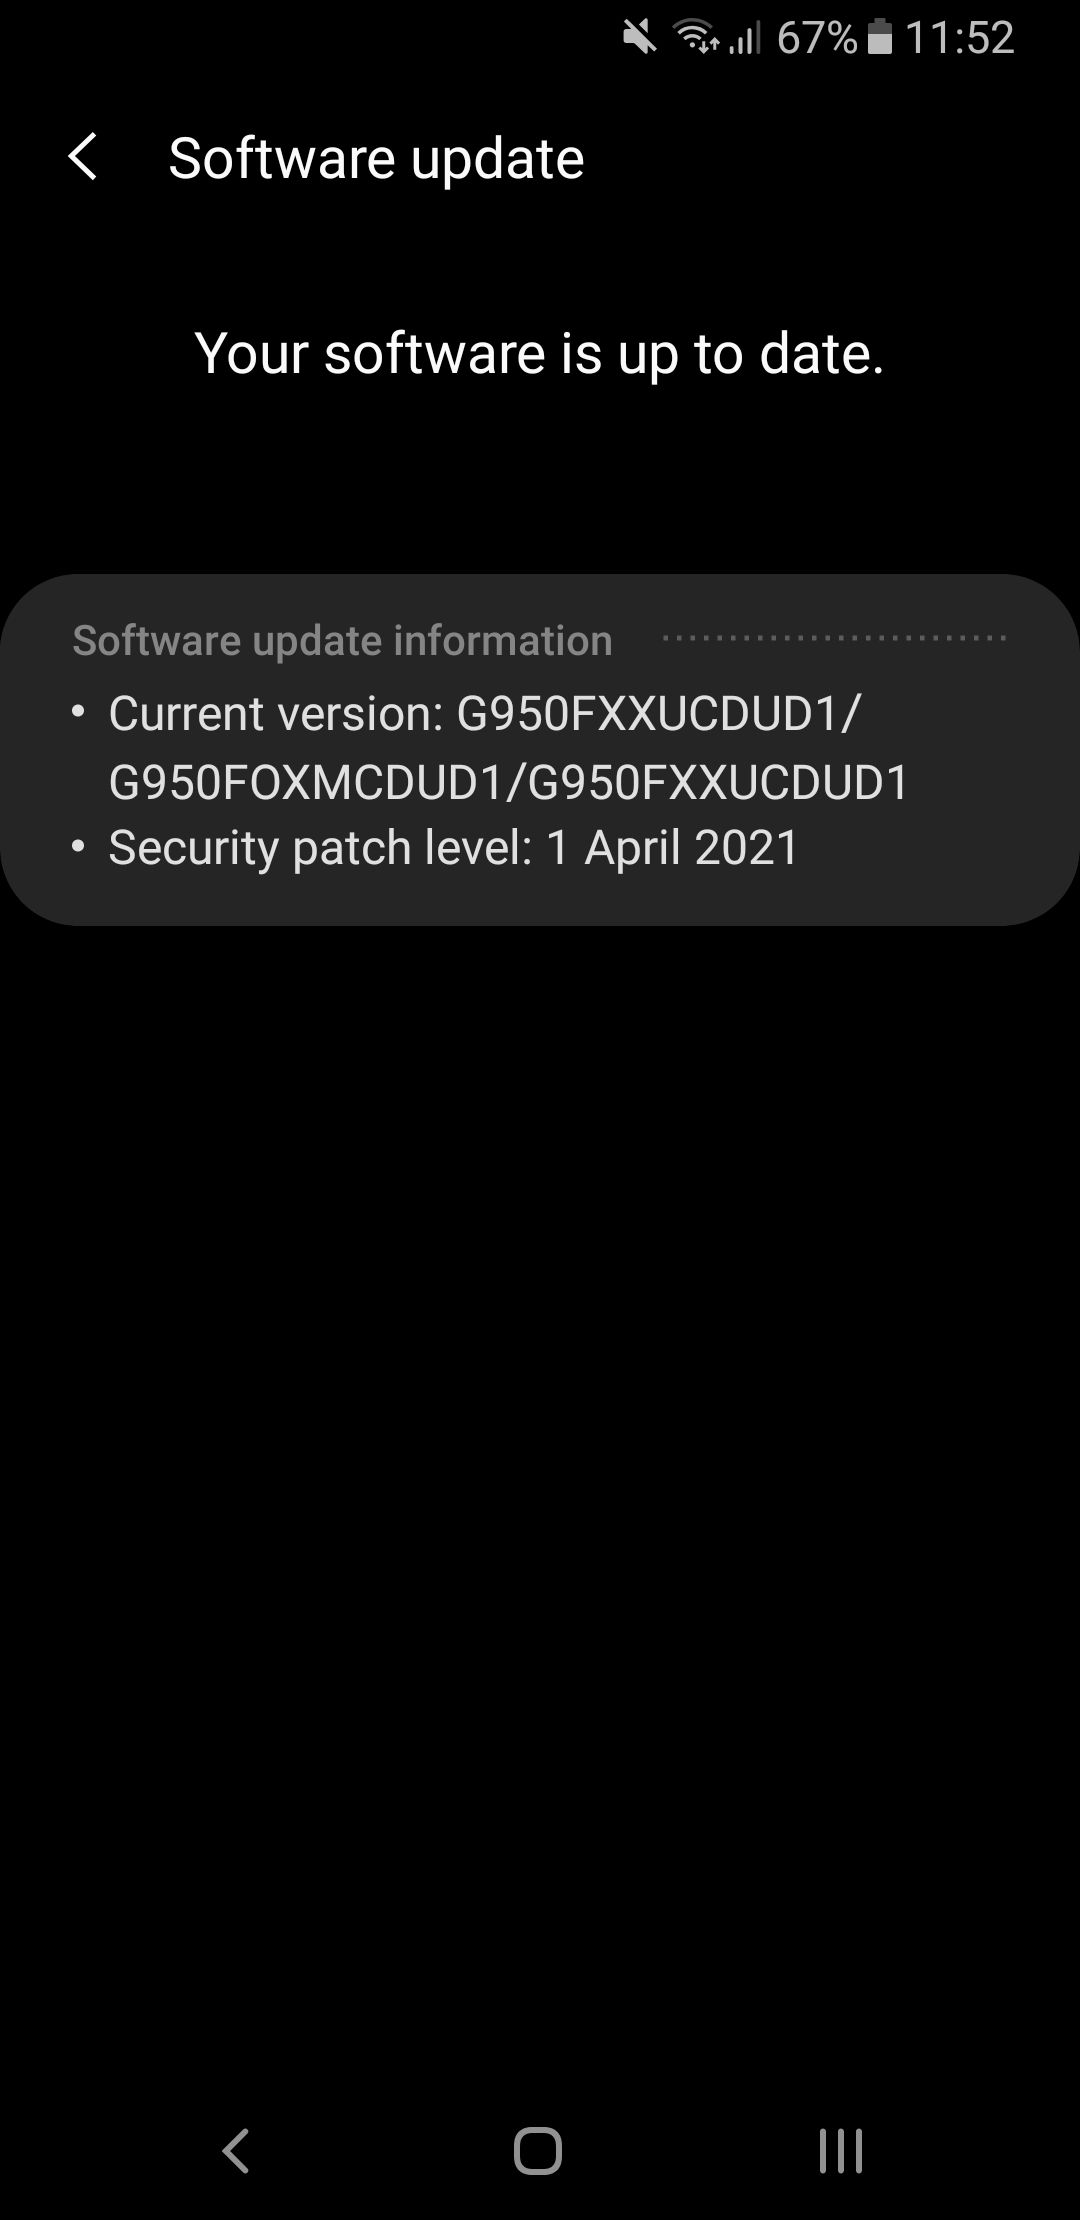 samsung phone is up to date